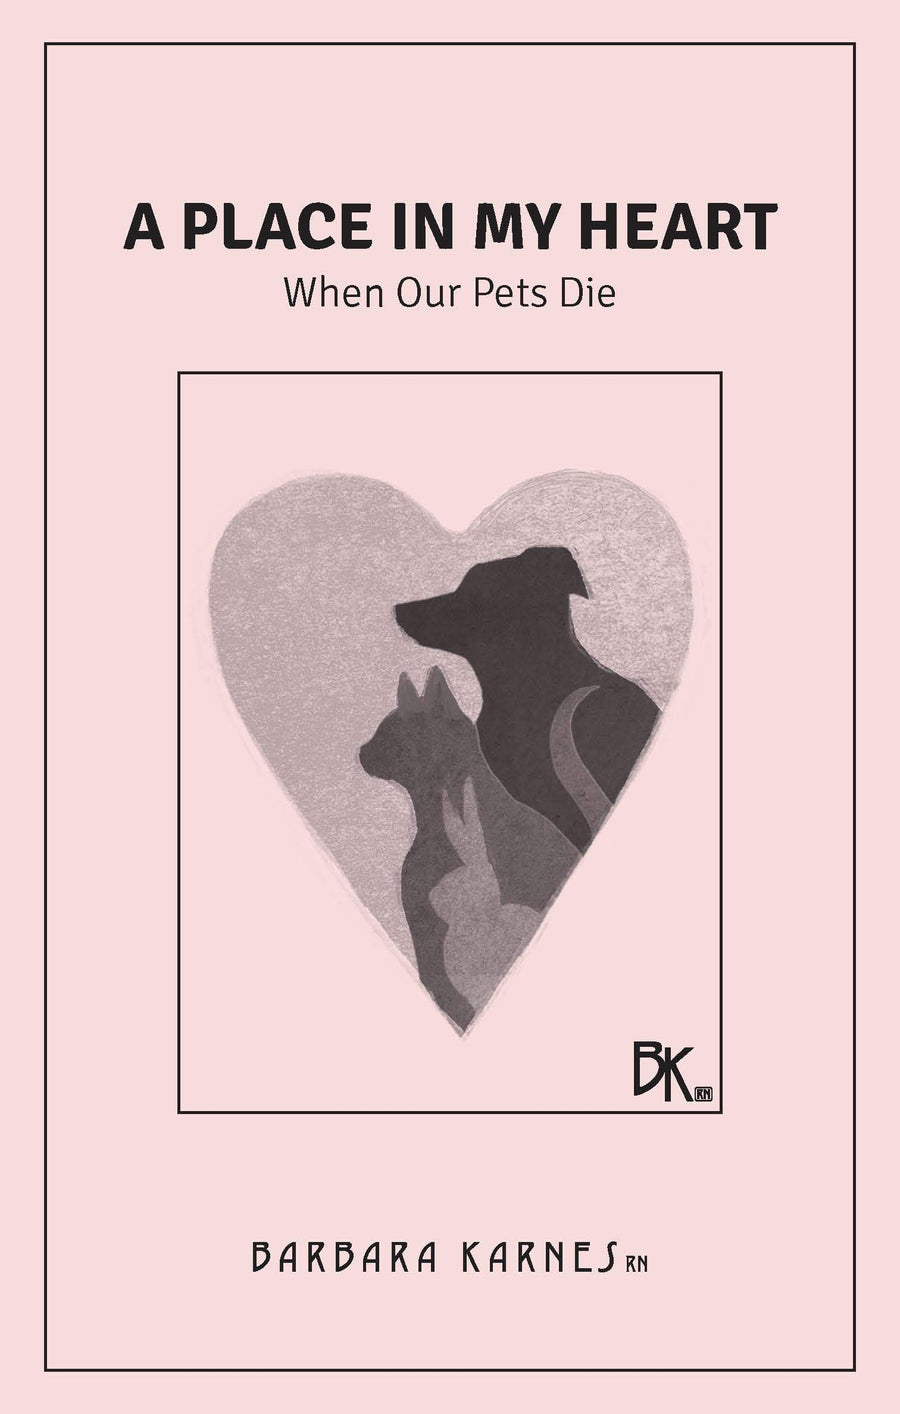 A Place In My Heart, When Our Pet Dies is an explanation of the dying process, signs that often occur as death approaches, and ideas for what can be done during that time.  